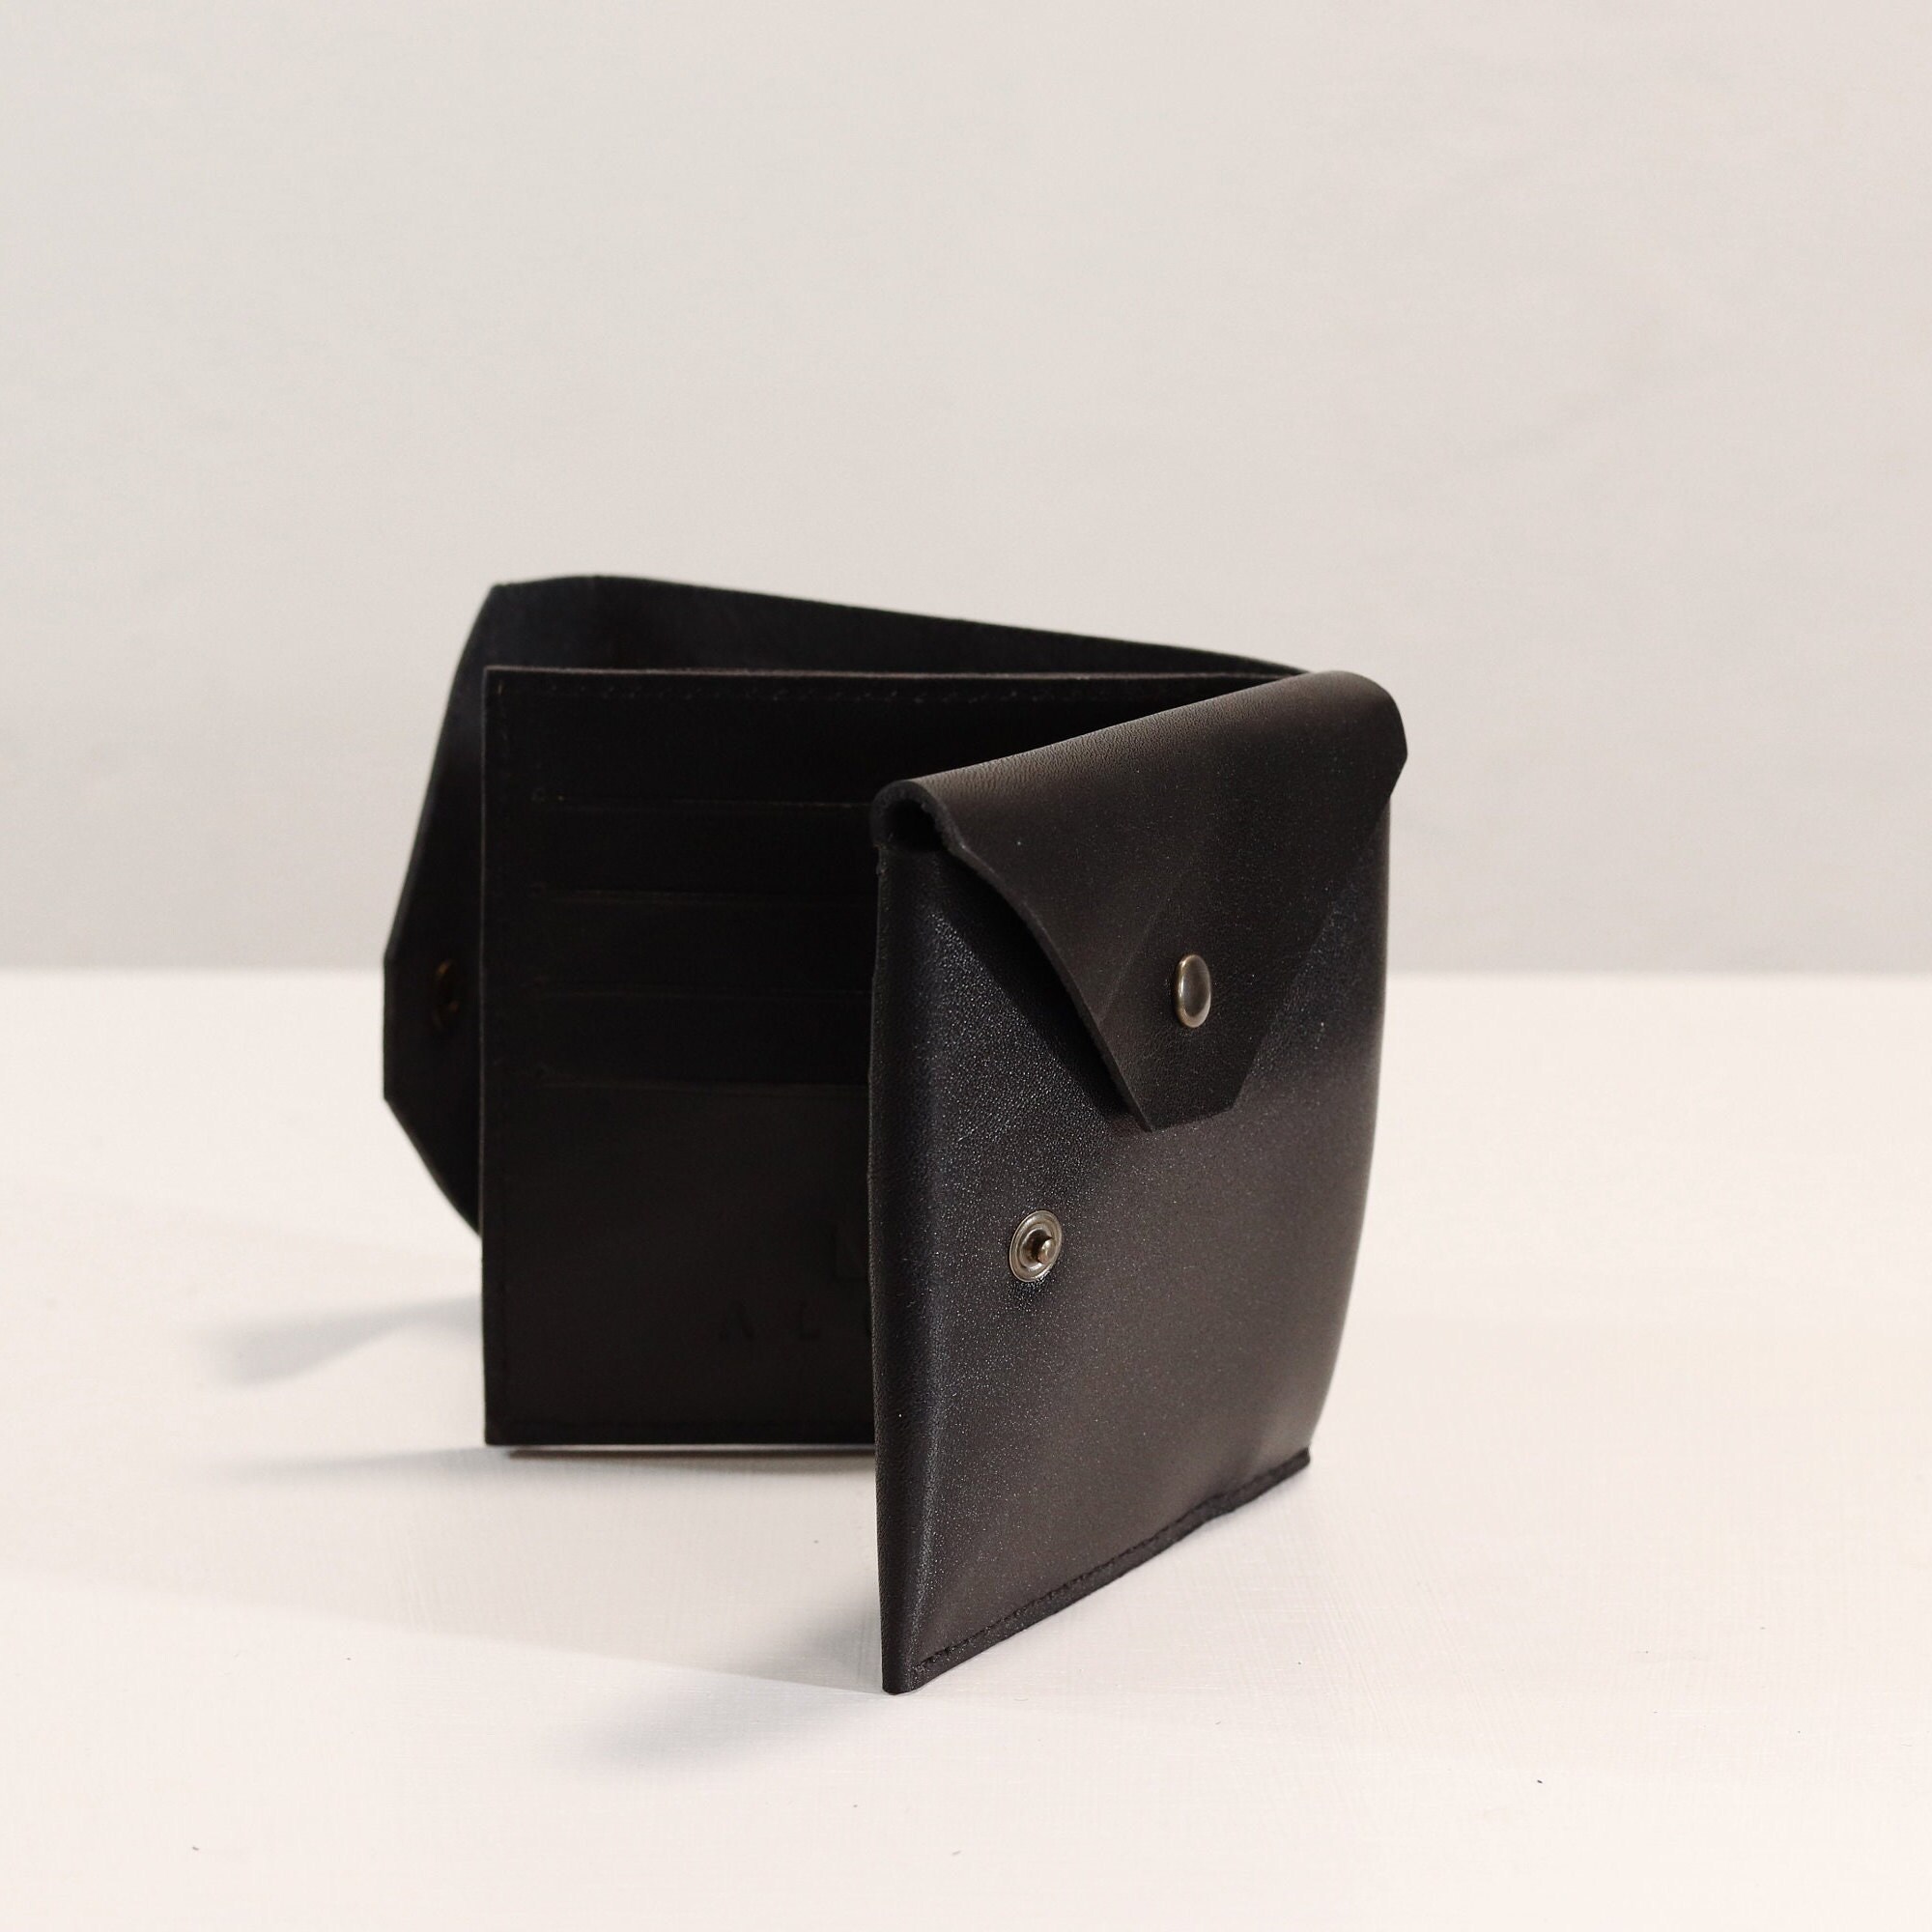 Unisex sauvage wallet handmade in black calf leather for cards banknot